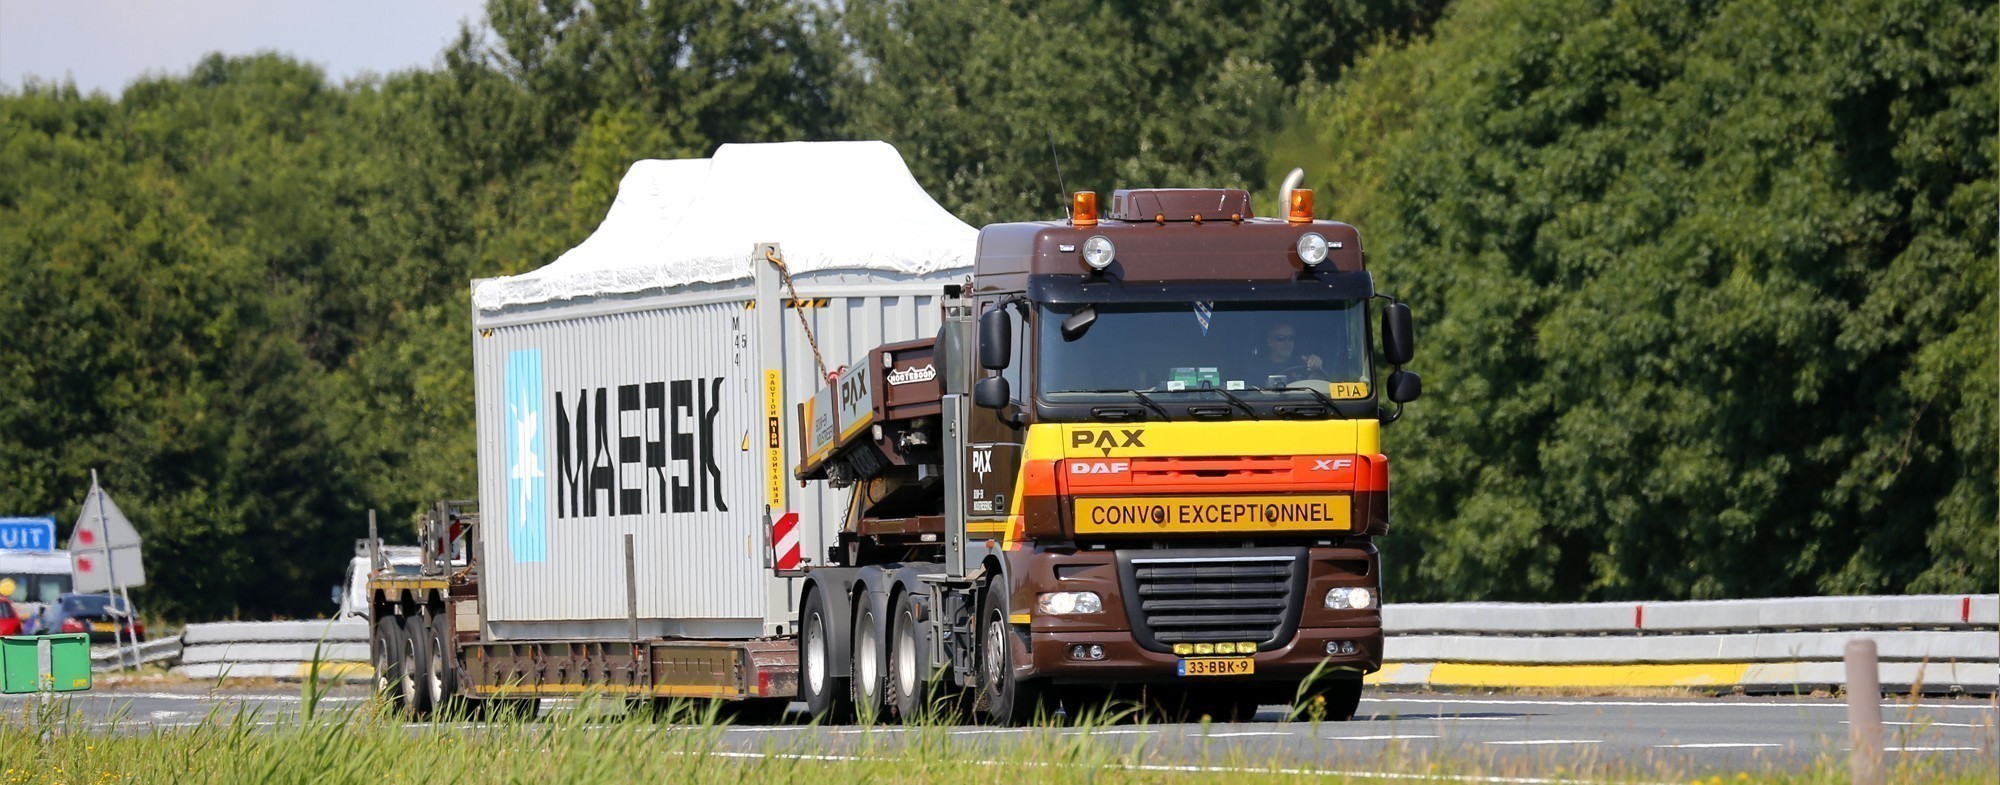 Out of gauge transport met open container